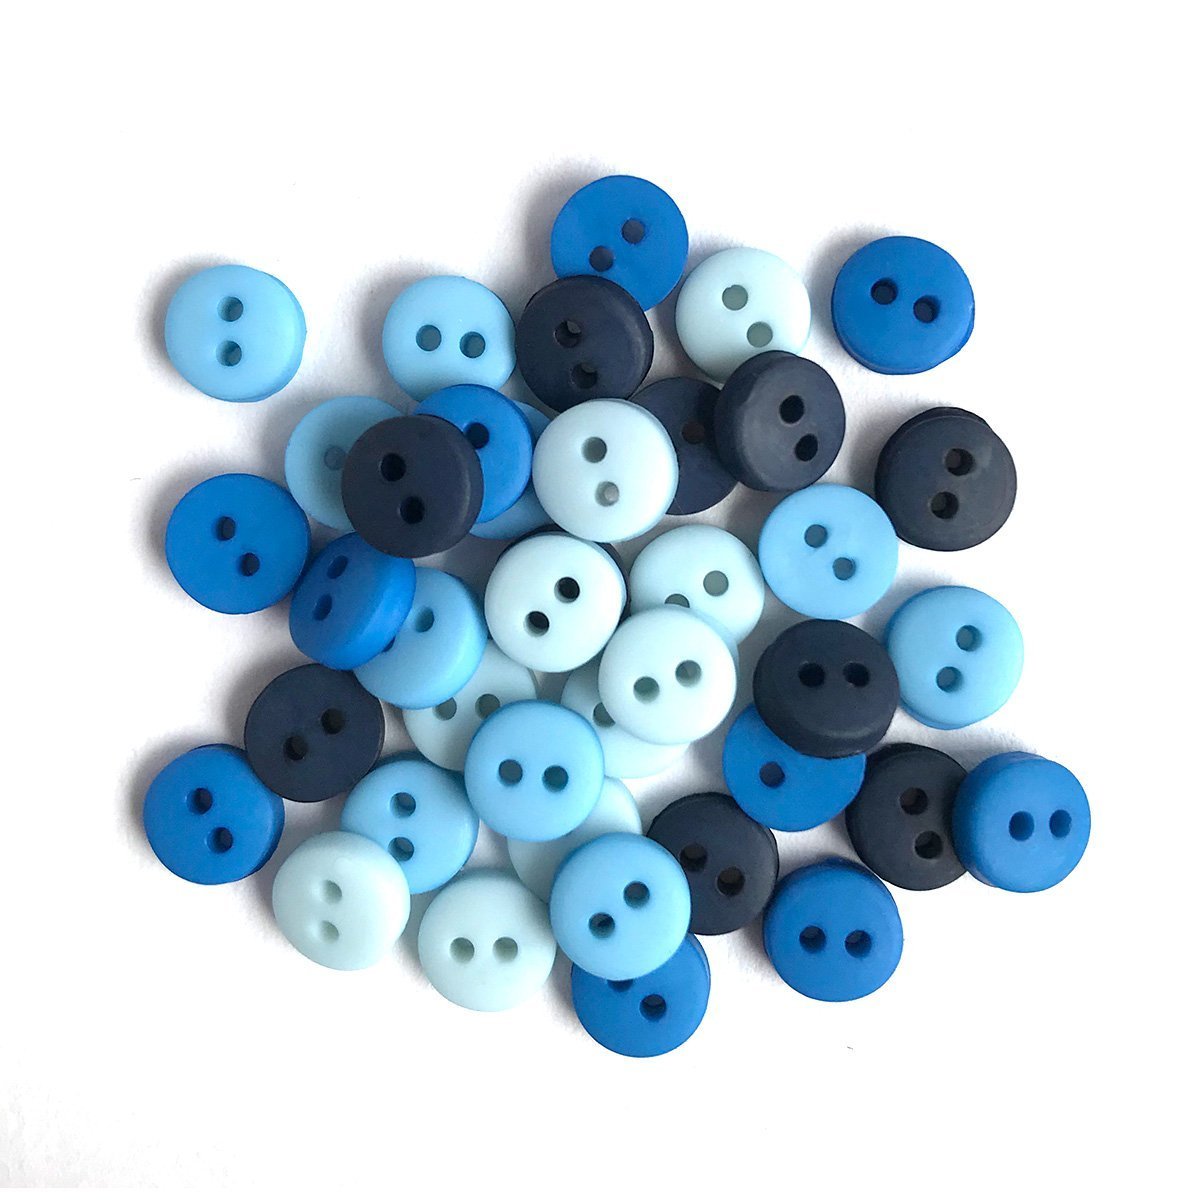 Blues - Buttons Galore and More